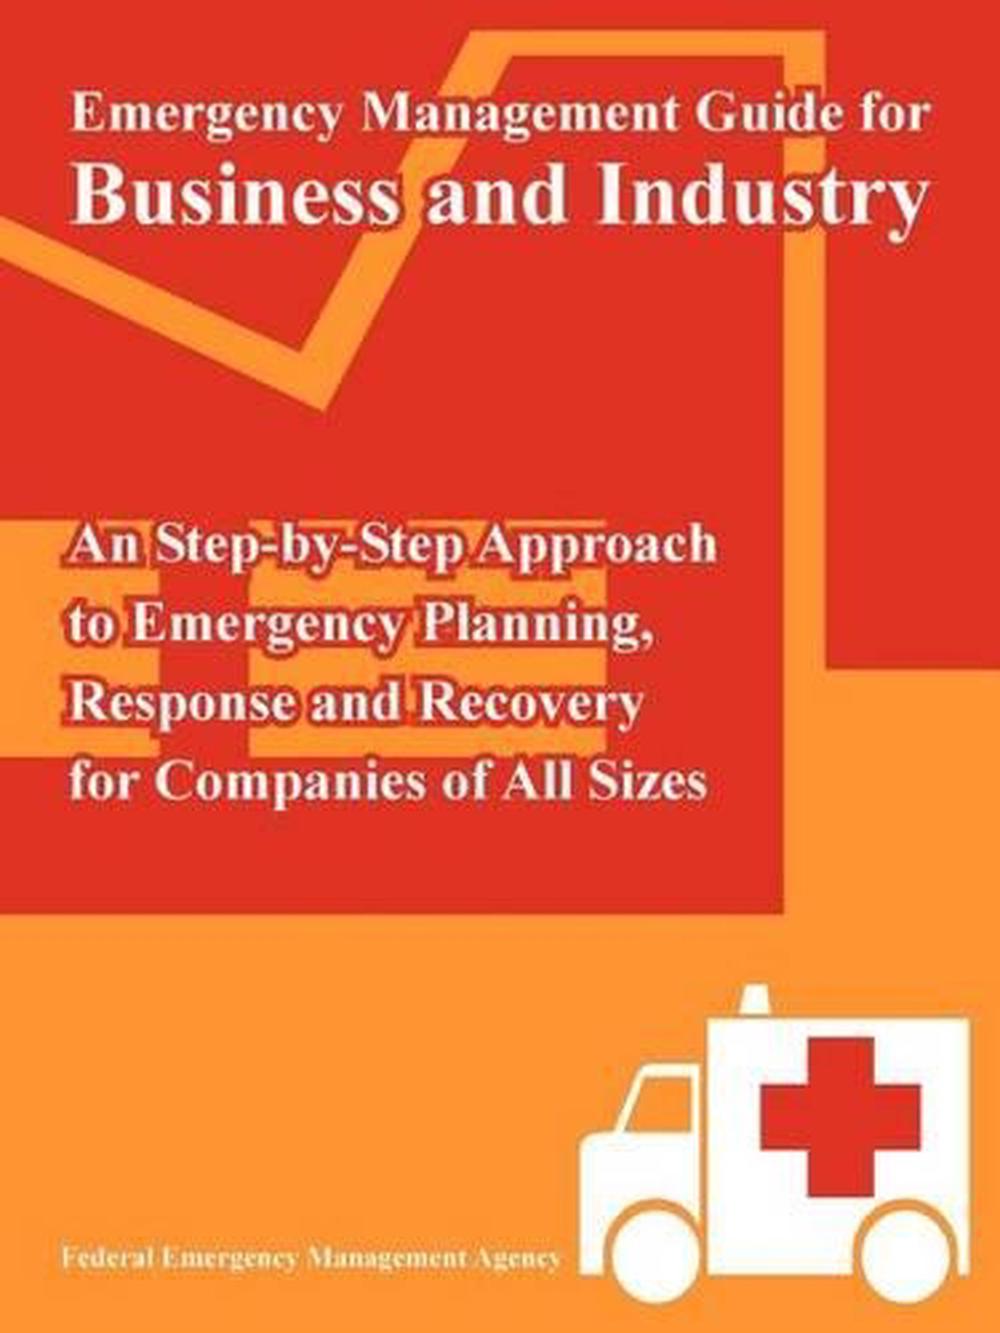 Emergency Management Guide for Business and Industry: An Step-By-Step